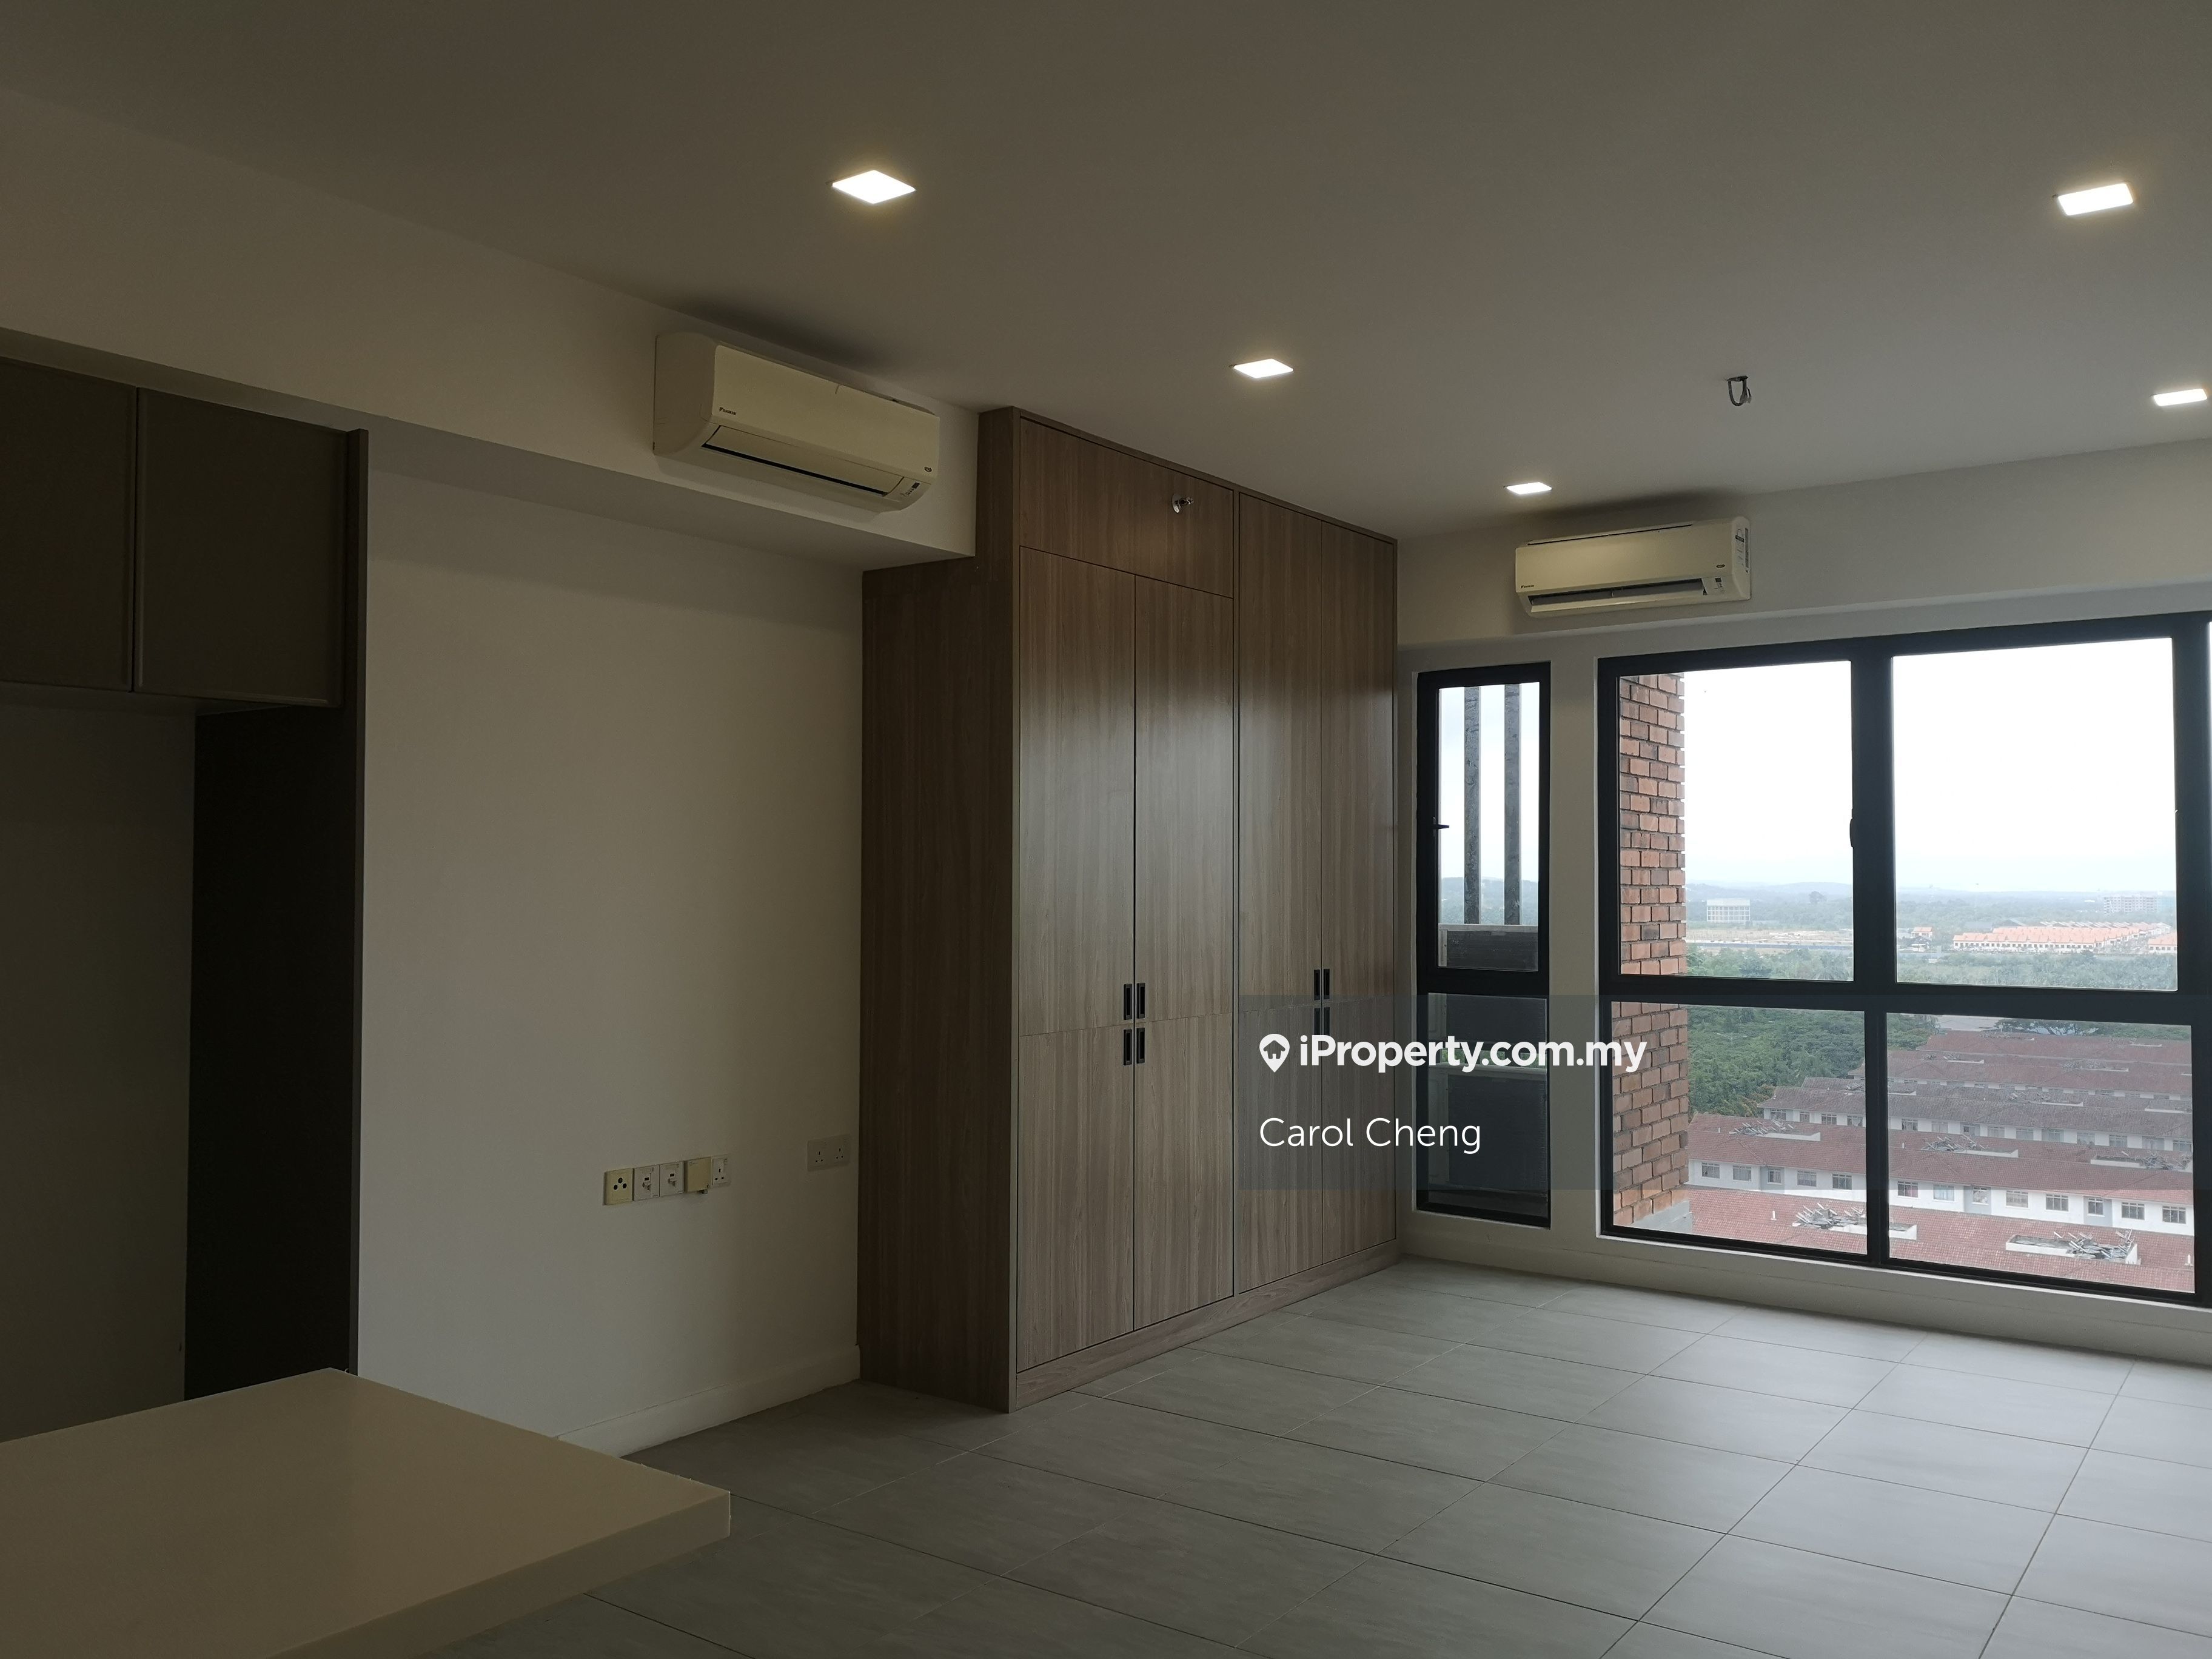 Bell Suites Serviced Residence for rent in Sepang, Selangor | iProperty ...